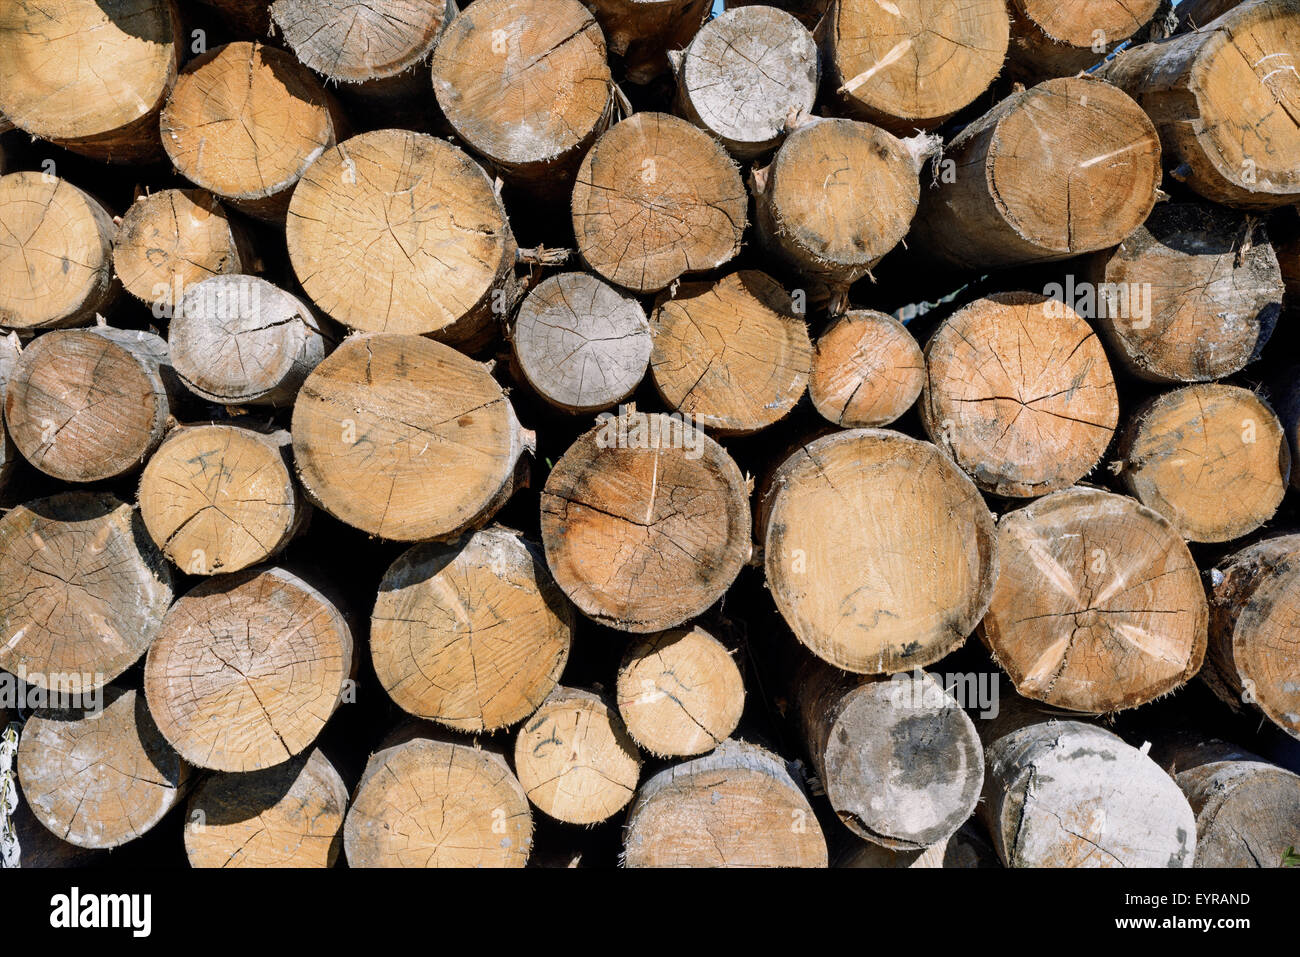 Backgrounds and textures: stack of wood, timber industry or nature abstract background Stock Photo